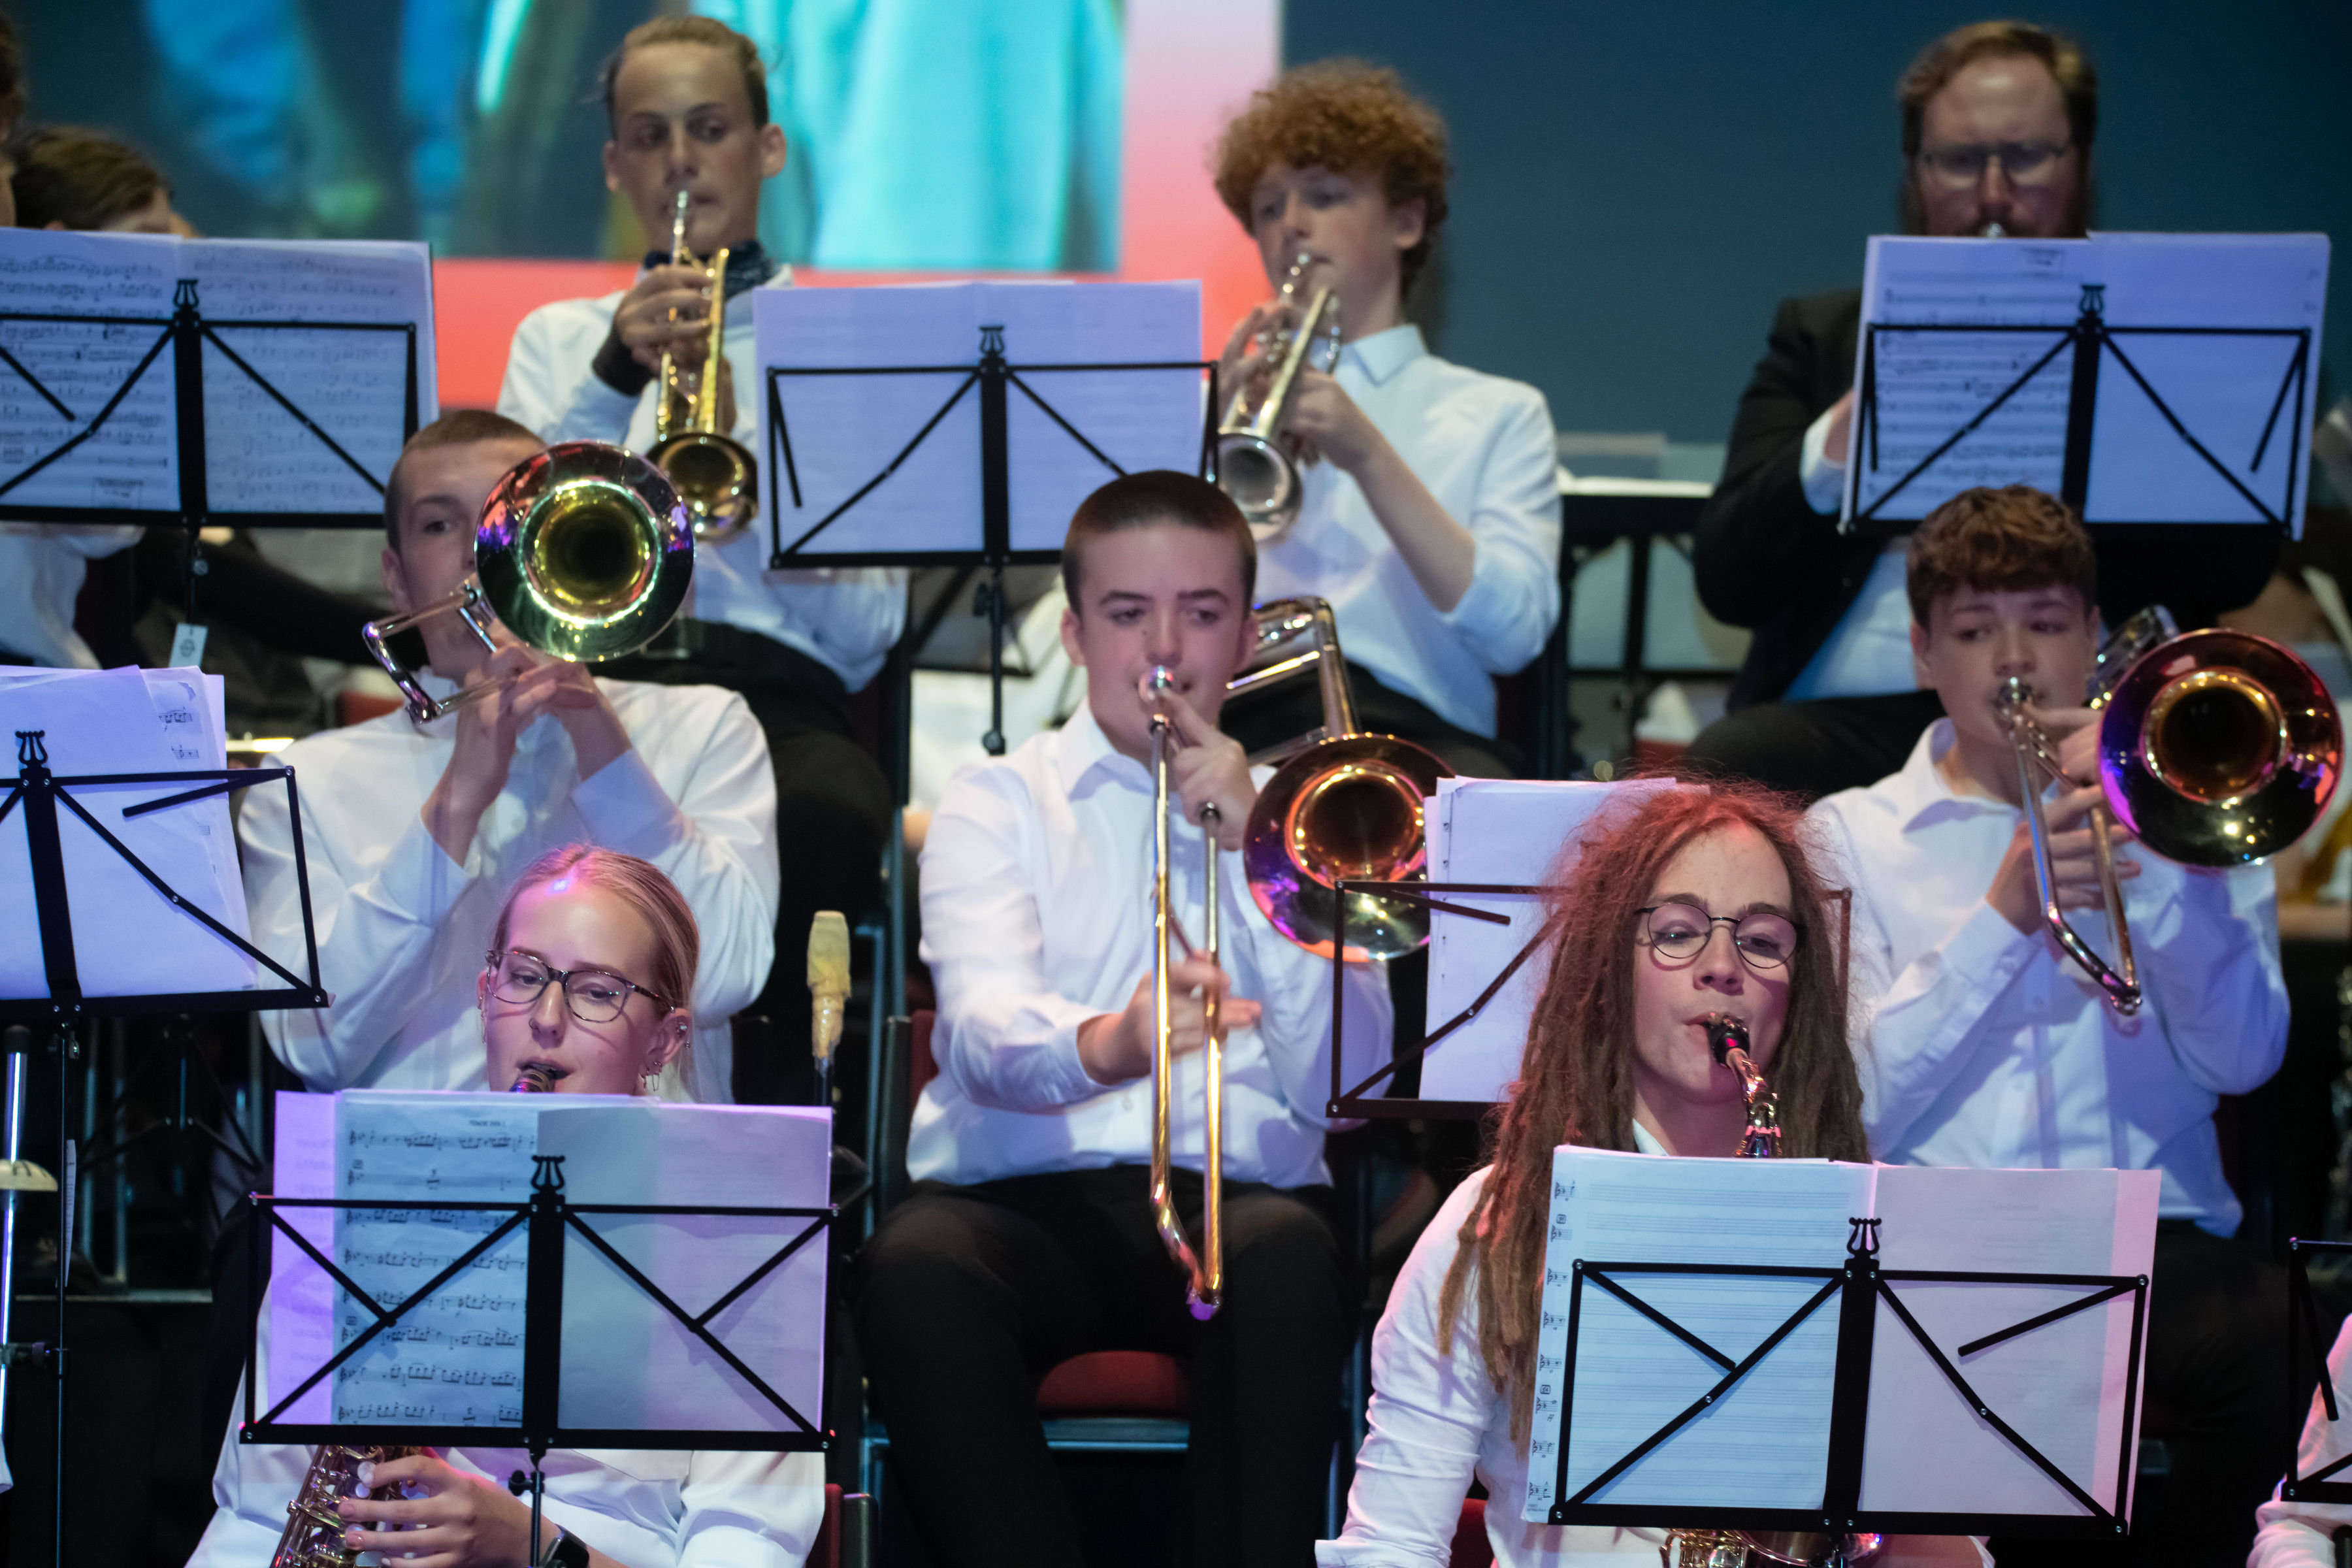 Talented members of North Yorkshire Council’s Big Band performing at the Queen’s Platinum Jubilee concert at the Harrogate Convention Centre last year.